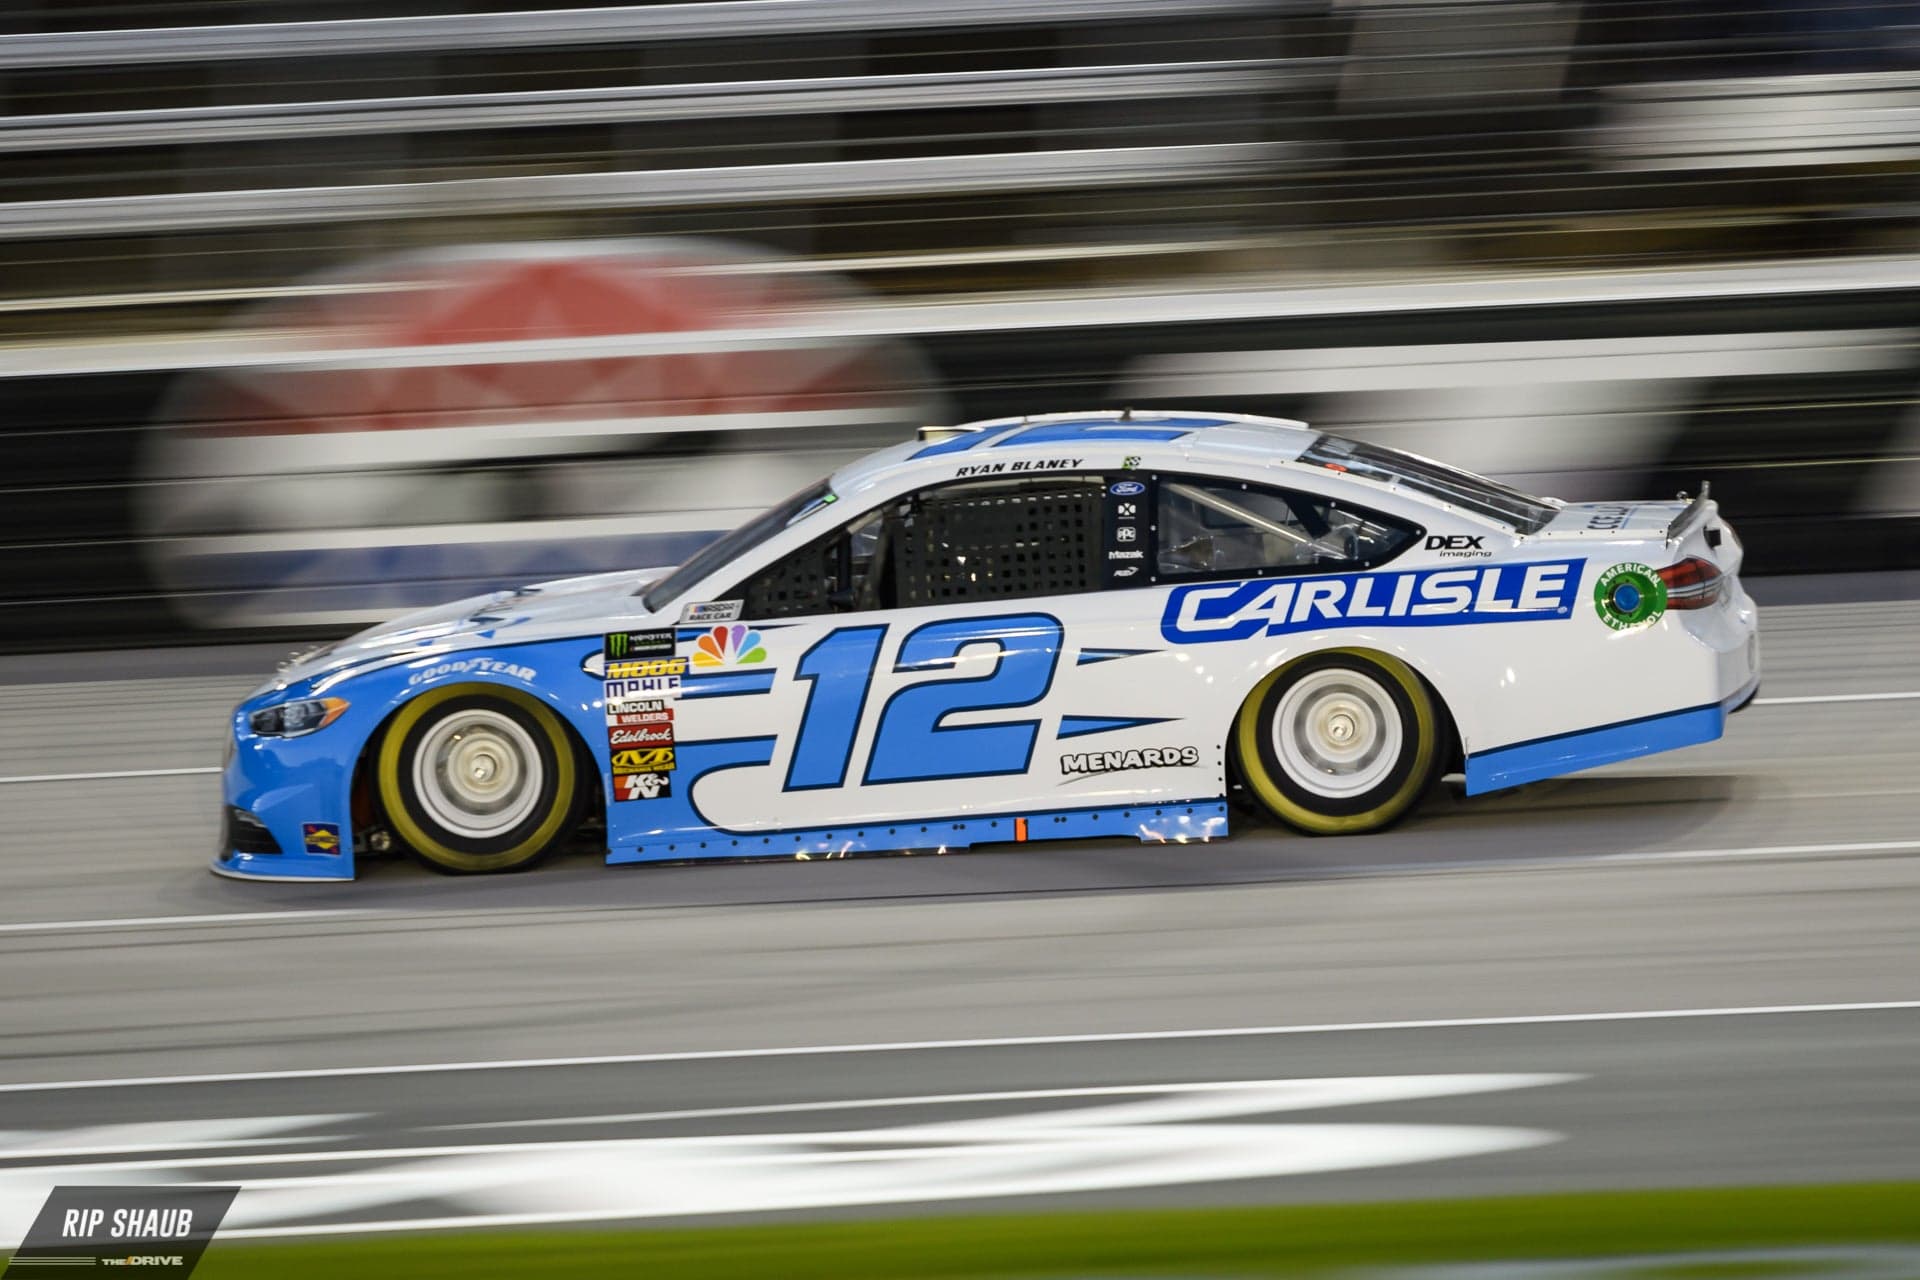 Ryan Blaney Fast at Texas, Claims Third NASCAR Cup Series Pole of 2018